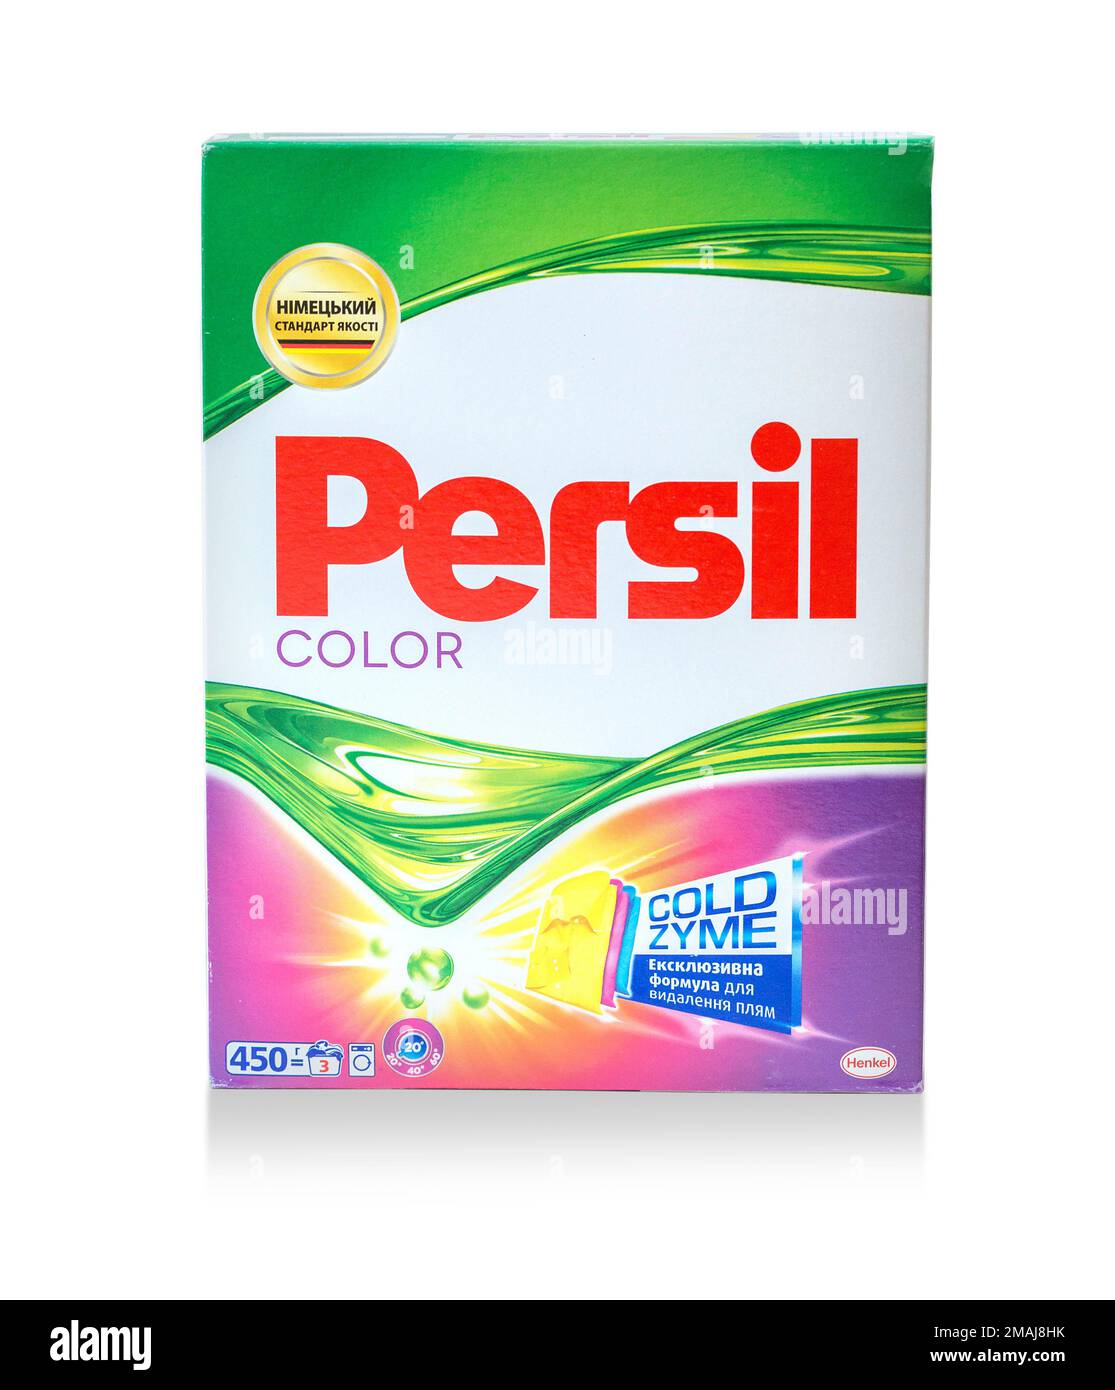 LVIV, UKRAINE  Octomber 30, 2016:  Box of Persil non-bio washing powder, studio shot on white. Persil is a brand of laundry detergent still made by th Stock Photo